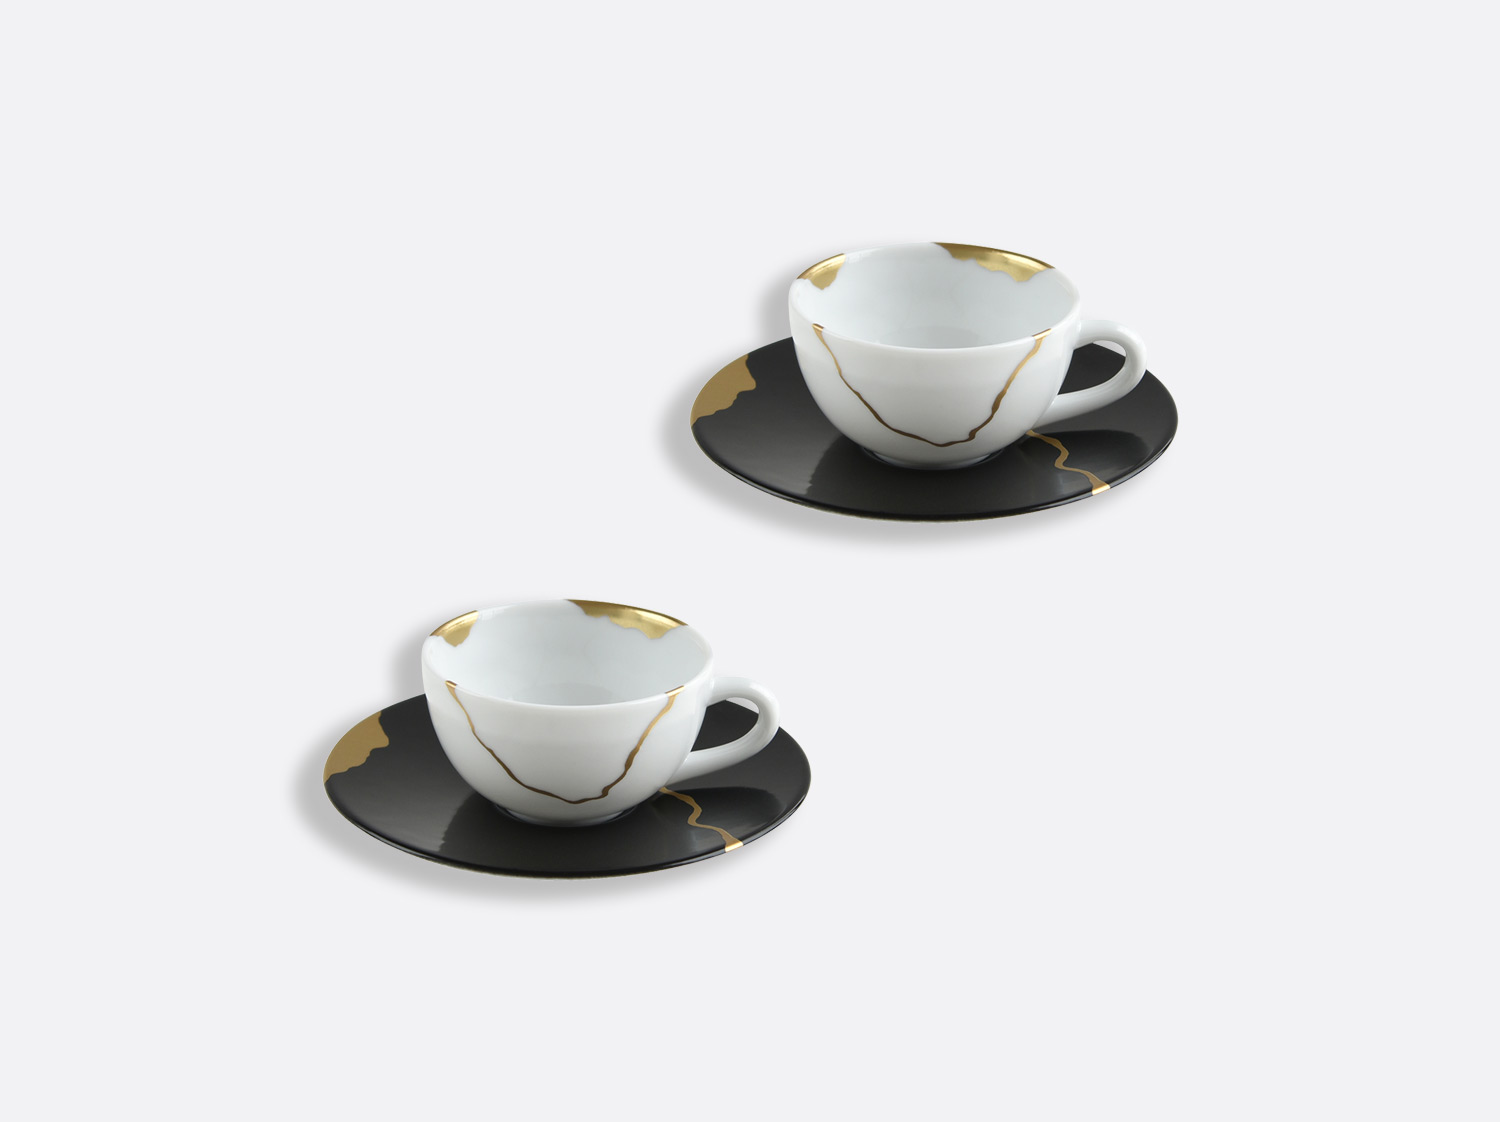 China Set of espresso cups and saucers 3.5 oz - Set of 2 of the collection KINTSUGI Charbon | Bernardaud